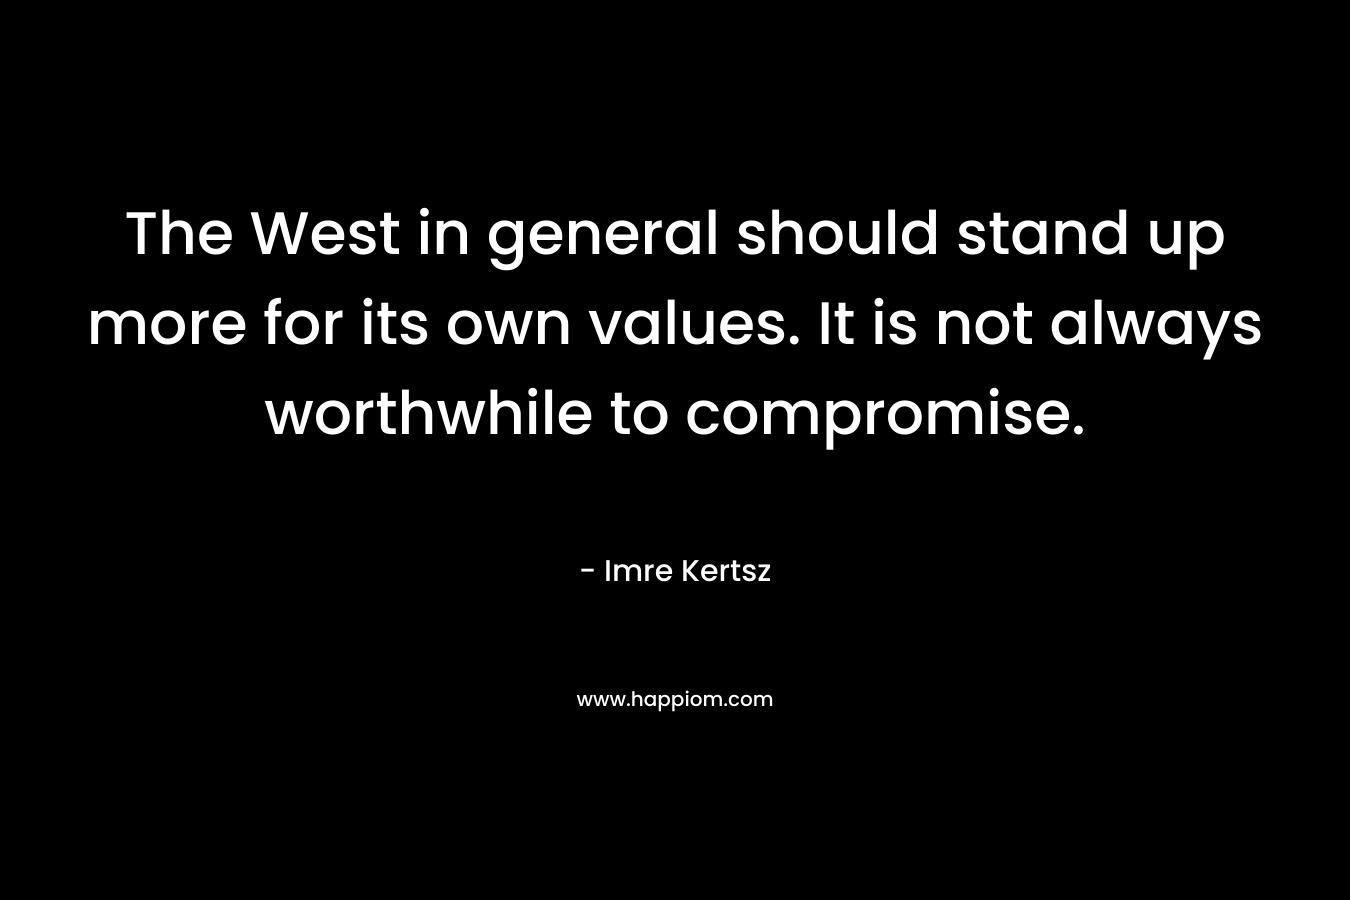 The West in general should stand up more for its own values. It is not always worthwhile to compromise. – Imre Kertsz